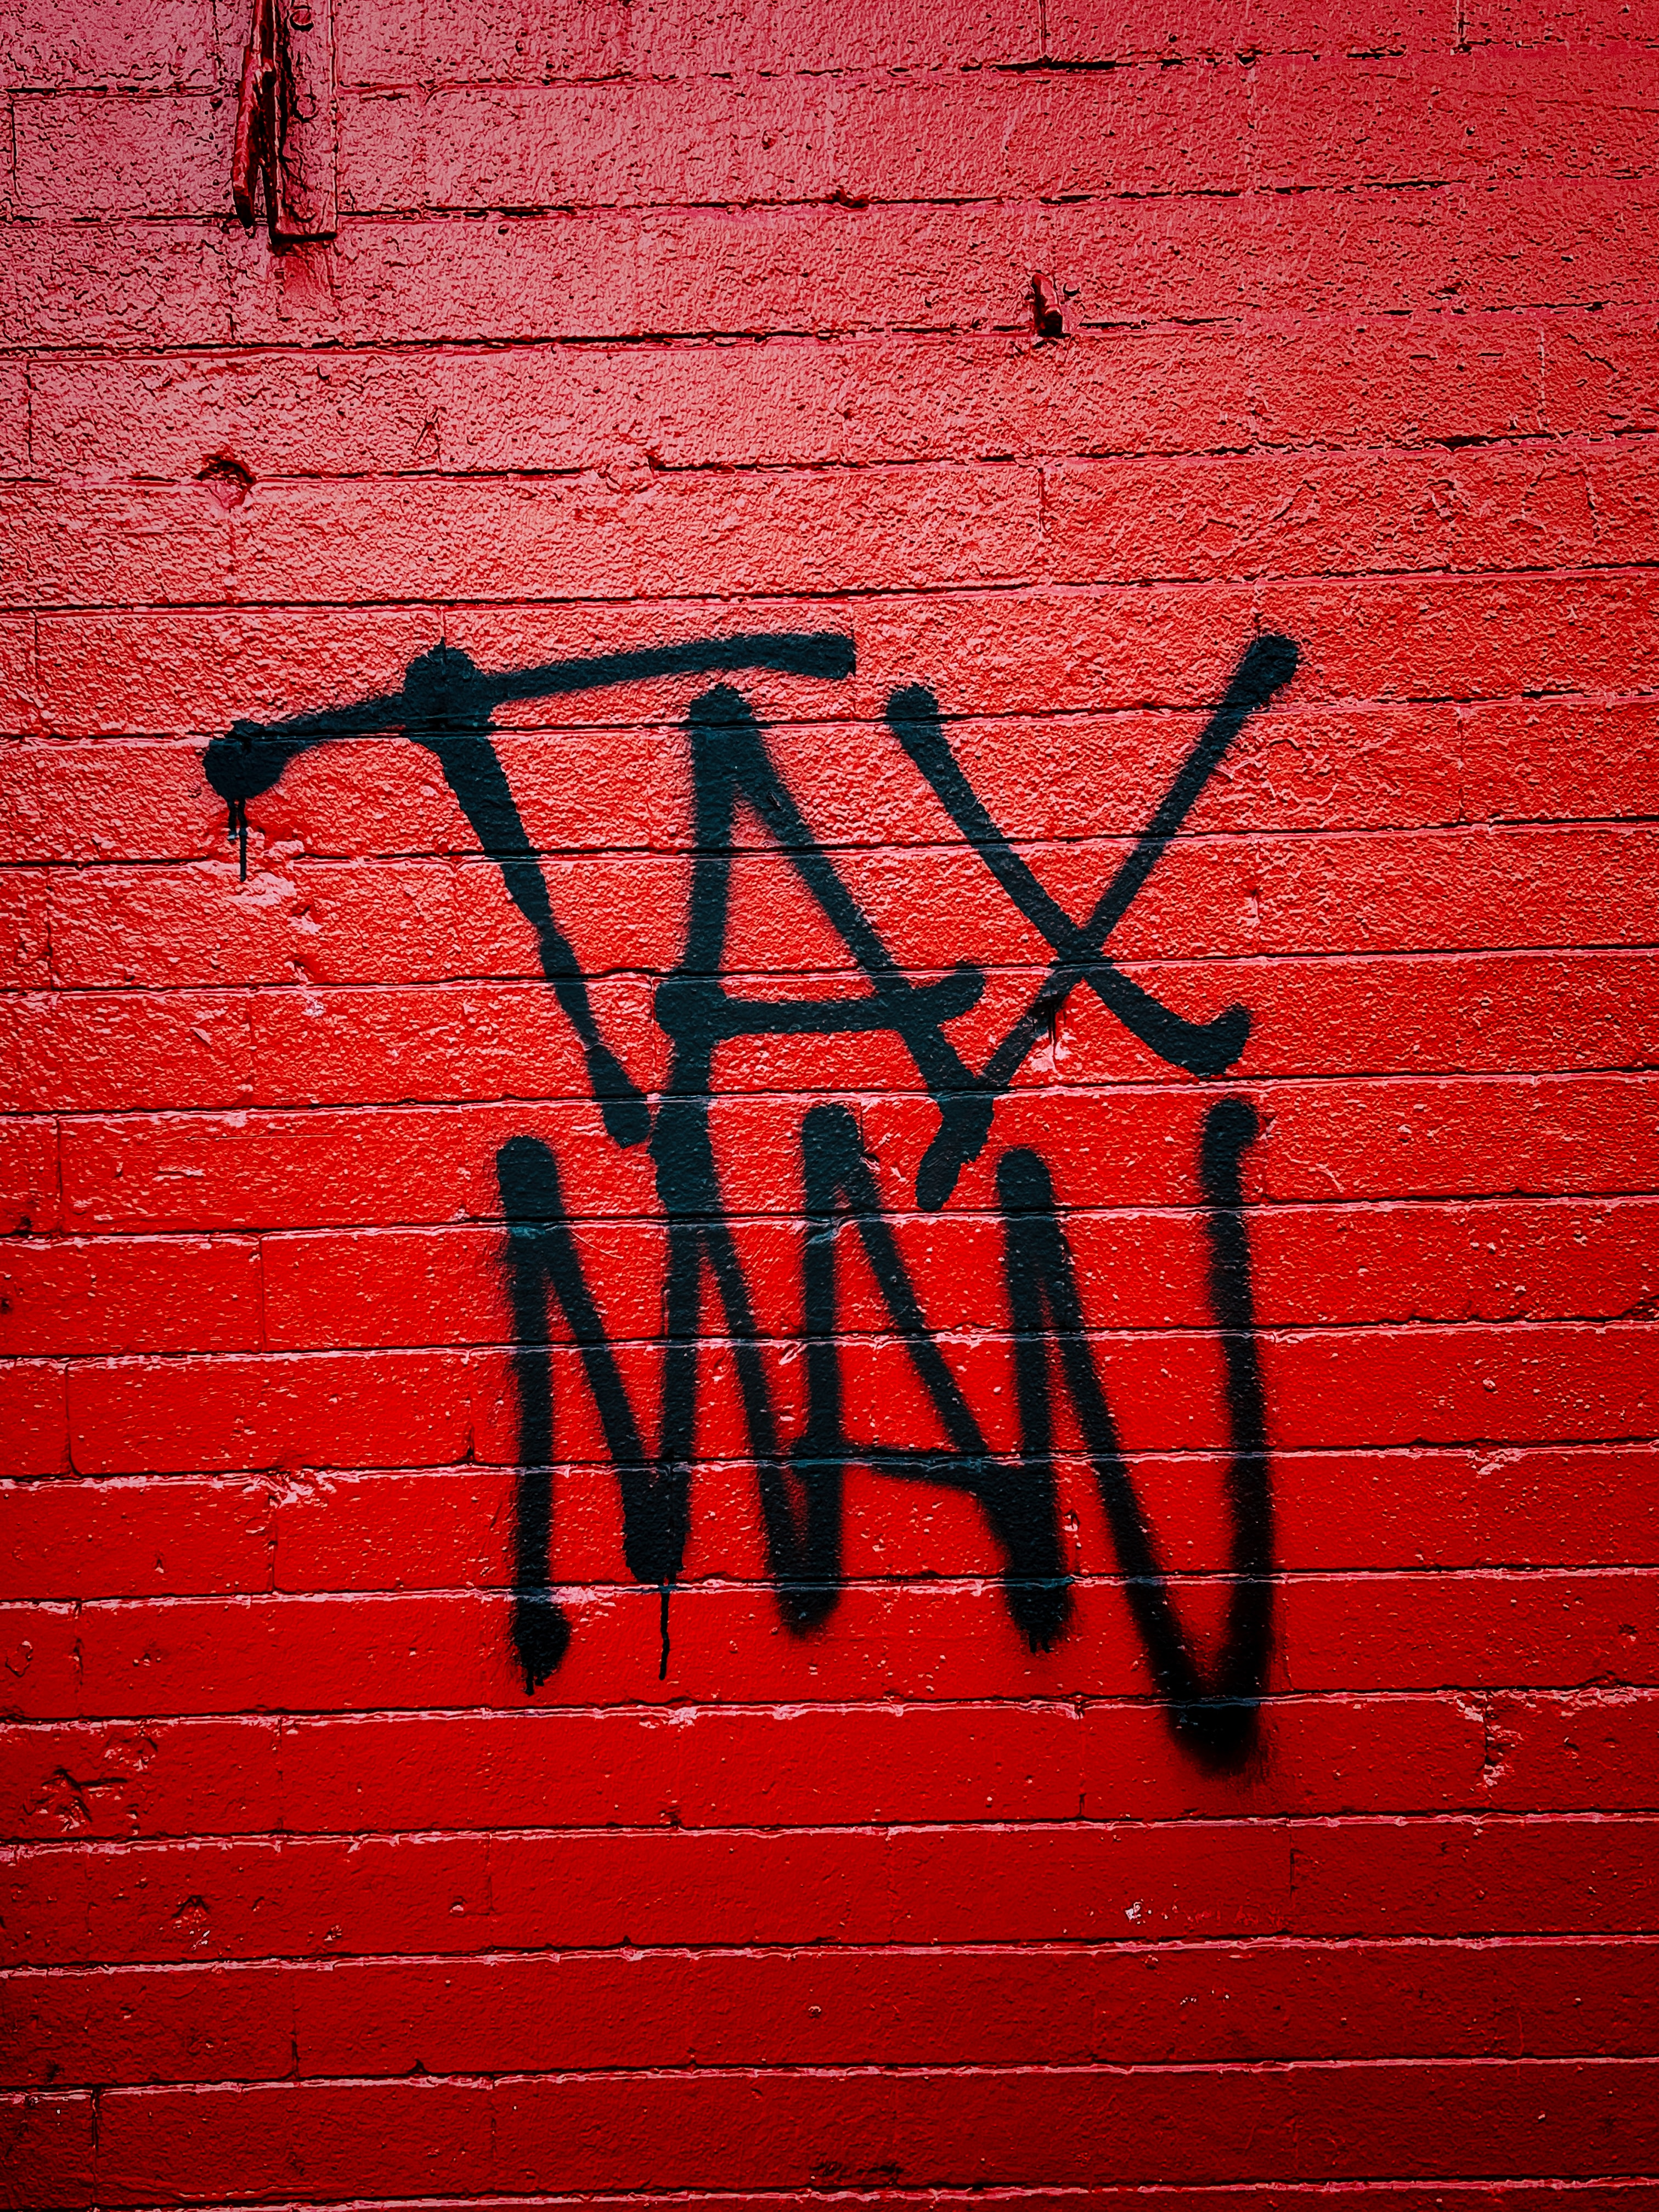 Tax Man painted in black on a red brick wall